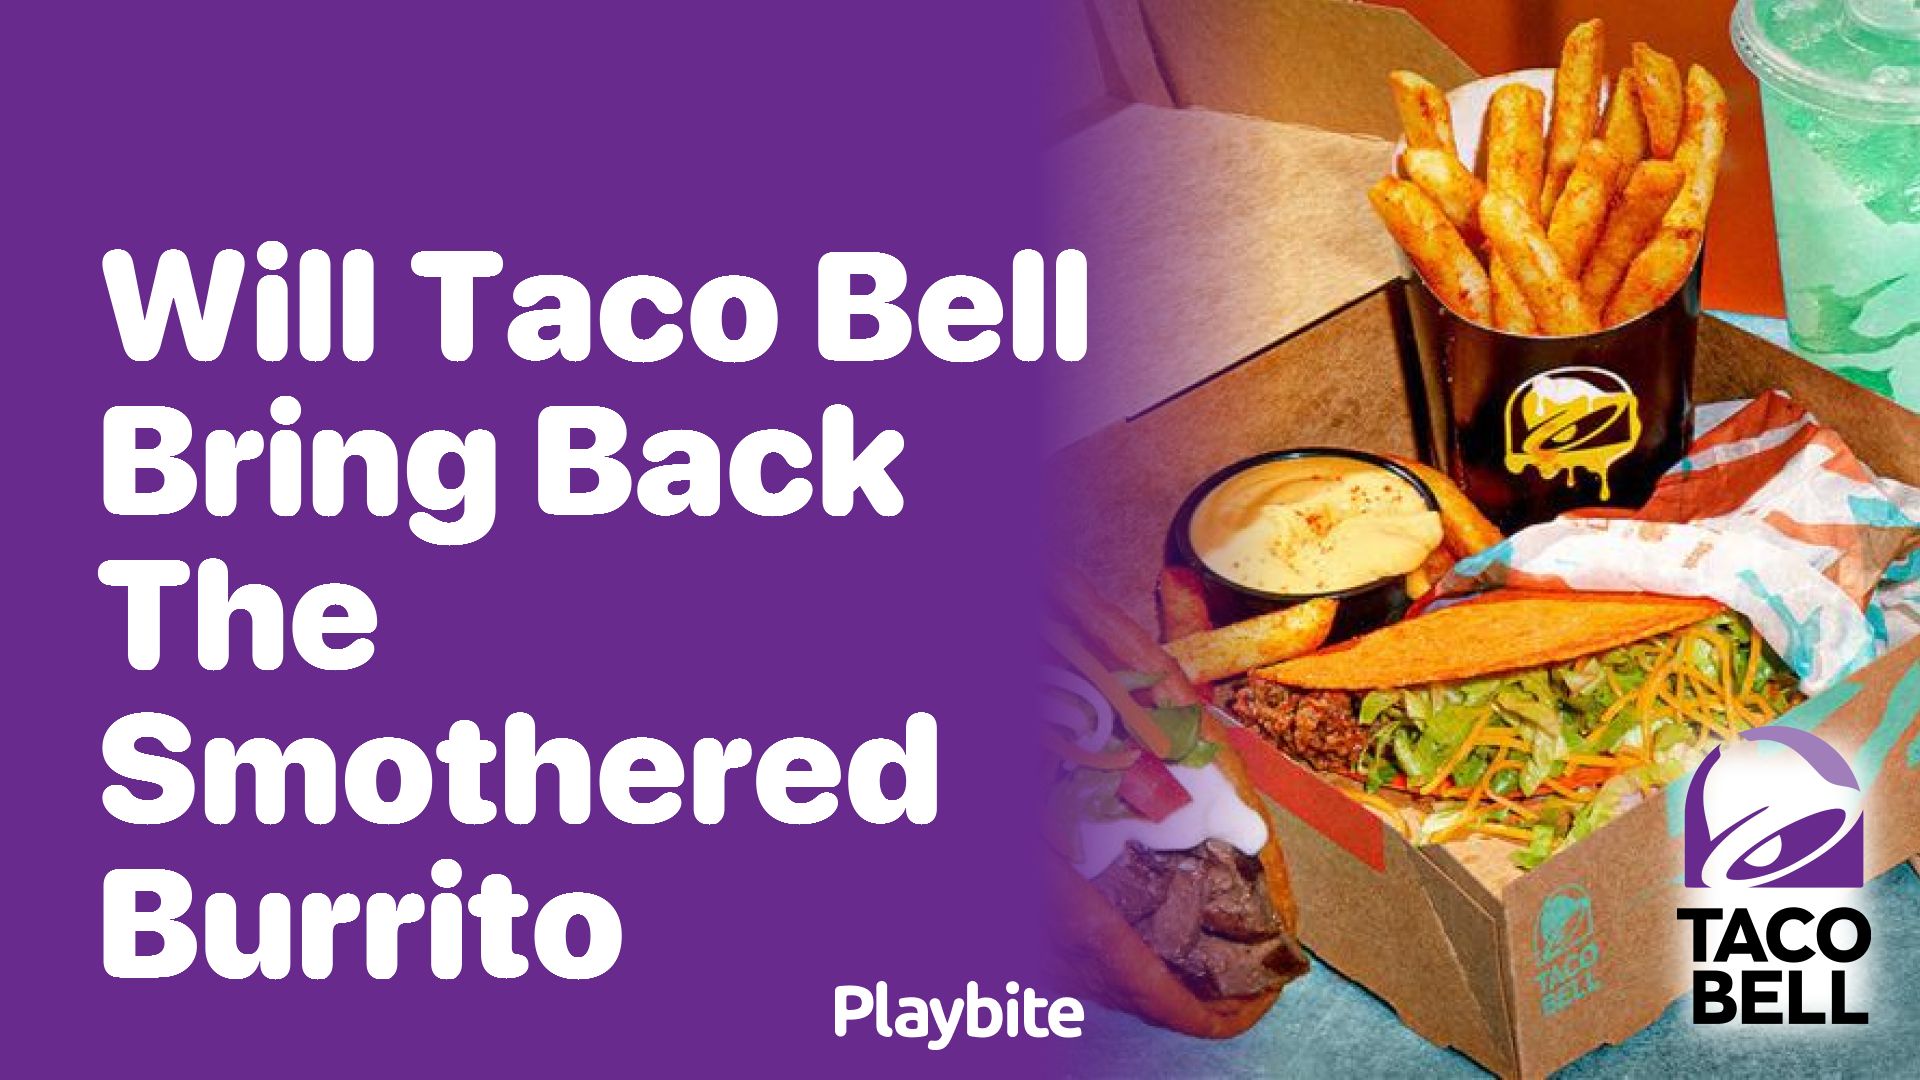 Will Taco Bell Bring Back the Smothered Burrito?